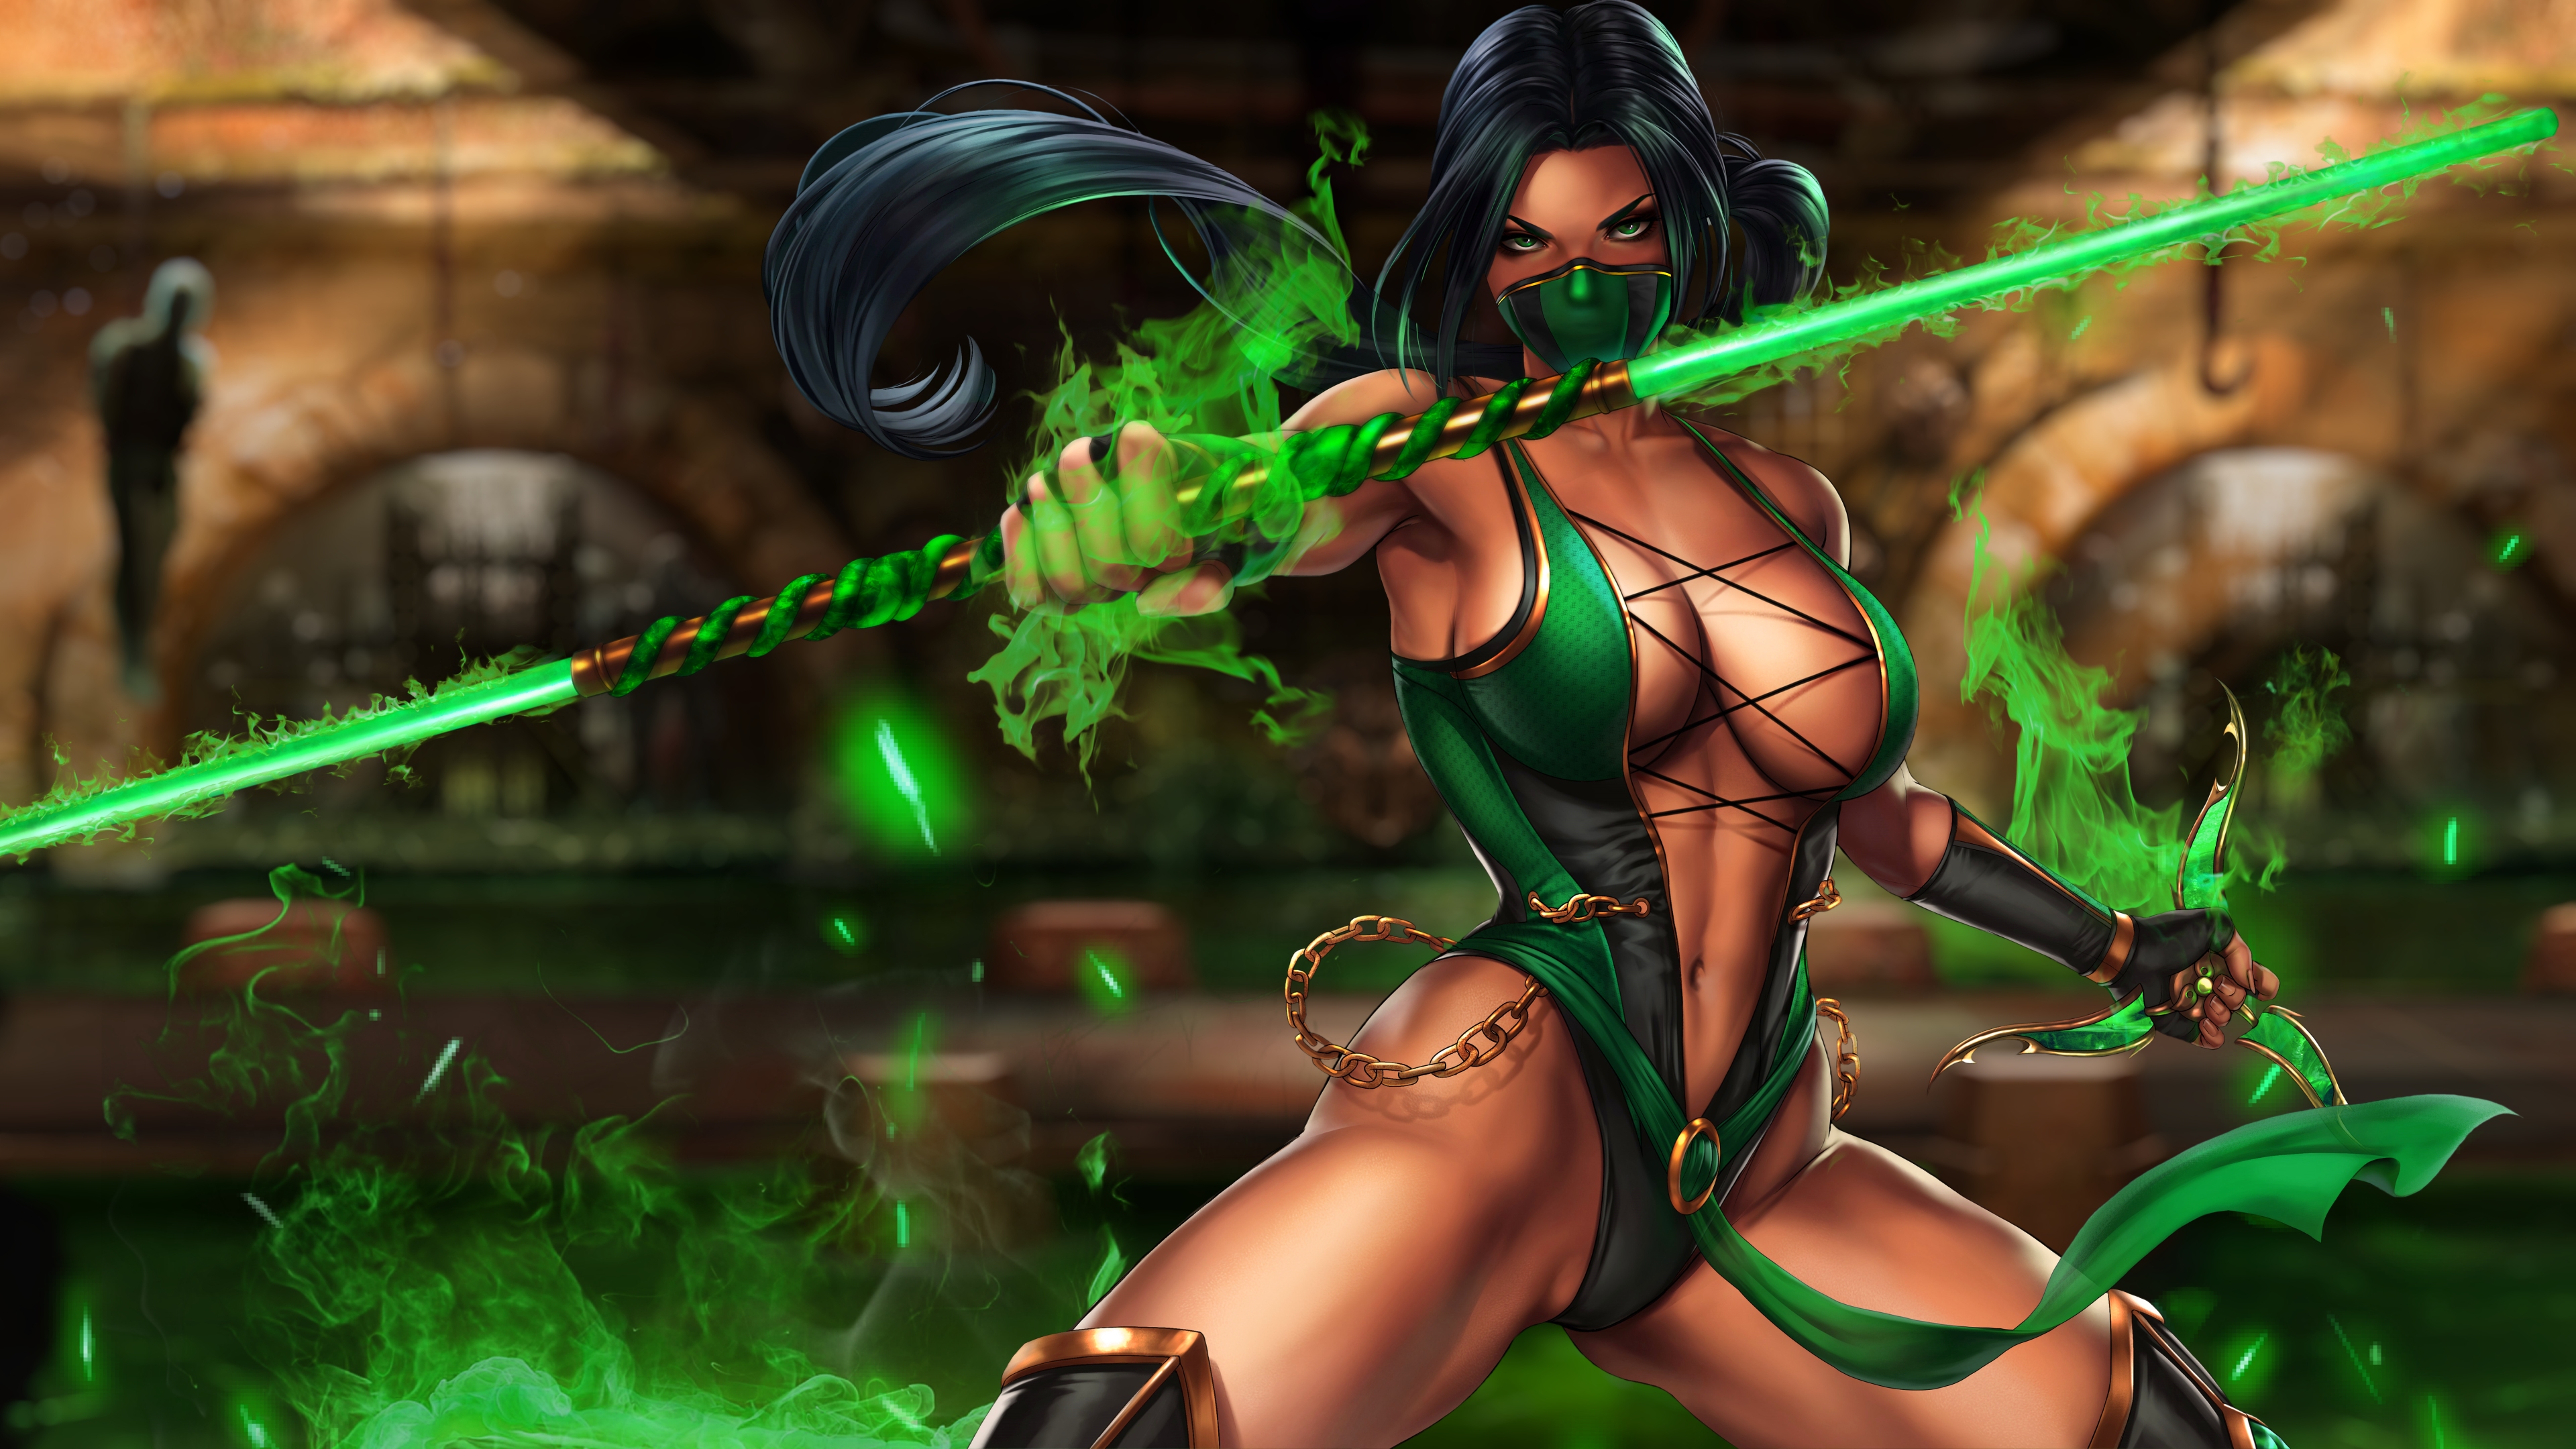 Free photo Green sword in the hands of a fantasy girl